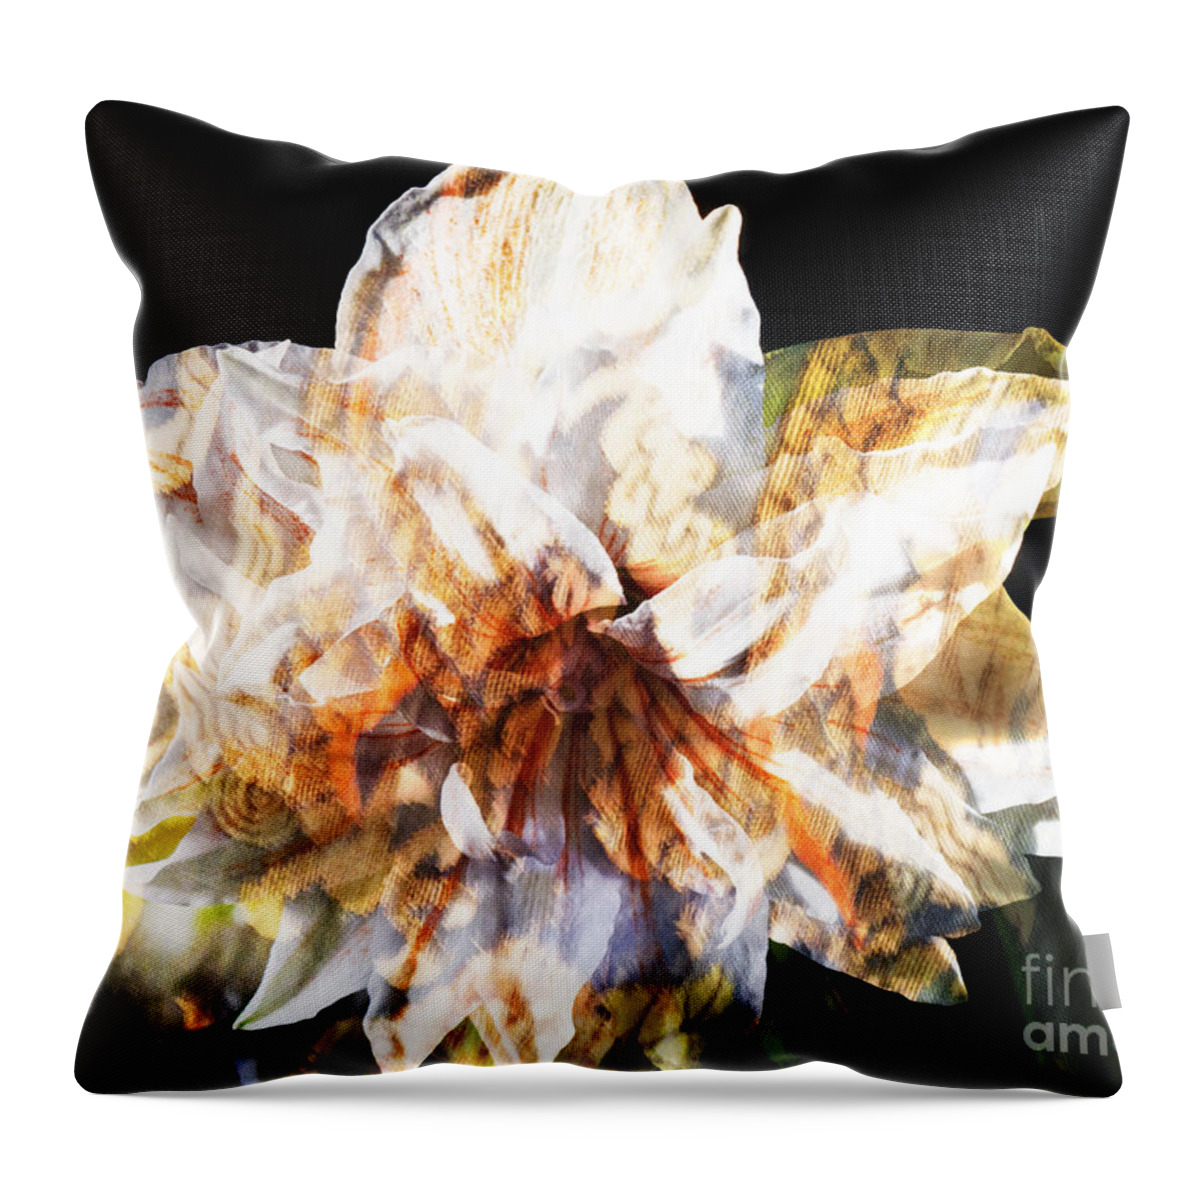 Amaryllis Throw Pillow featuring the photograph World in an Amaryllis Flower by Brenda Kean